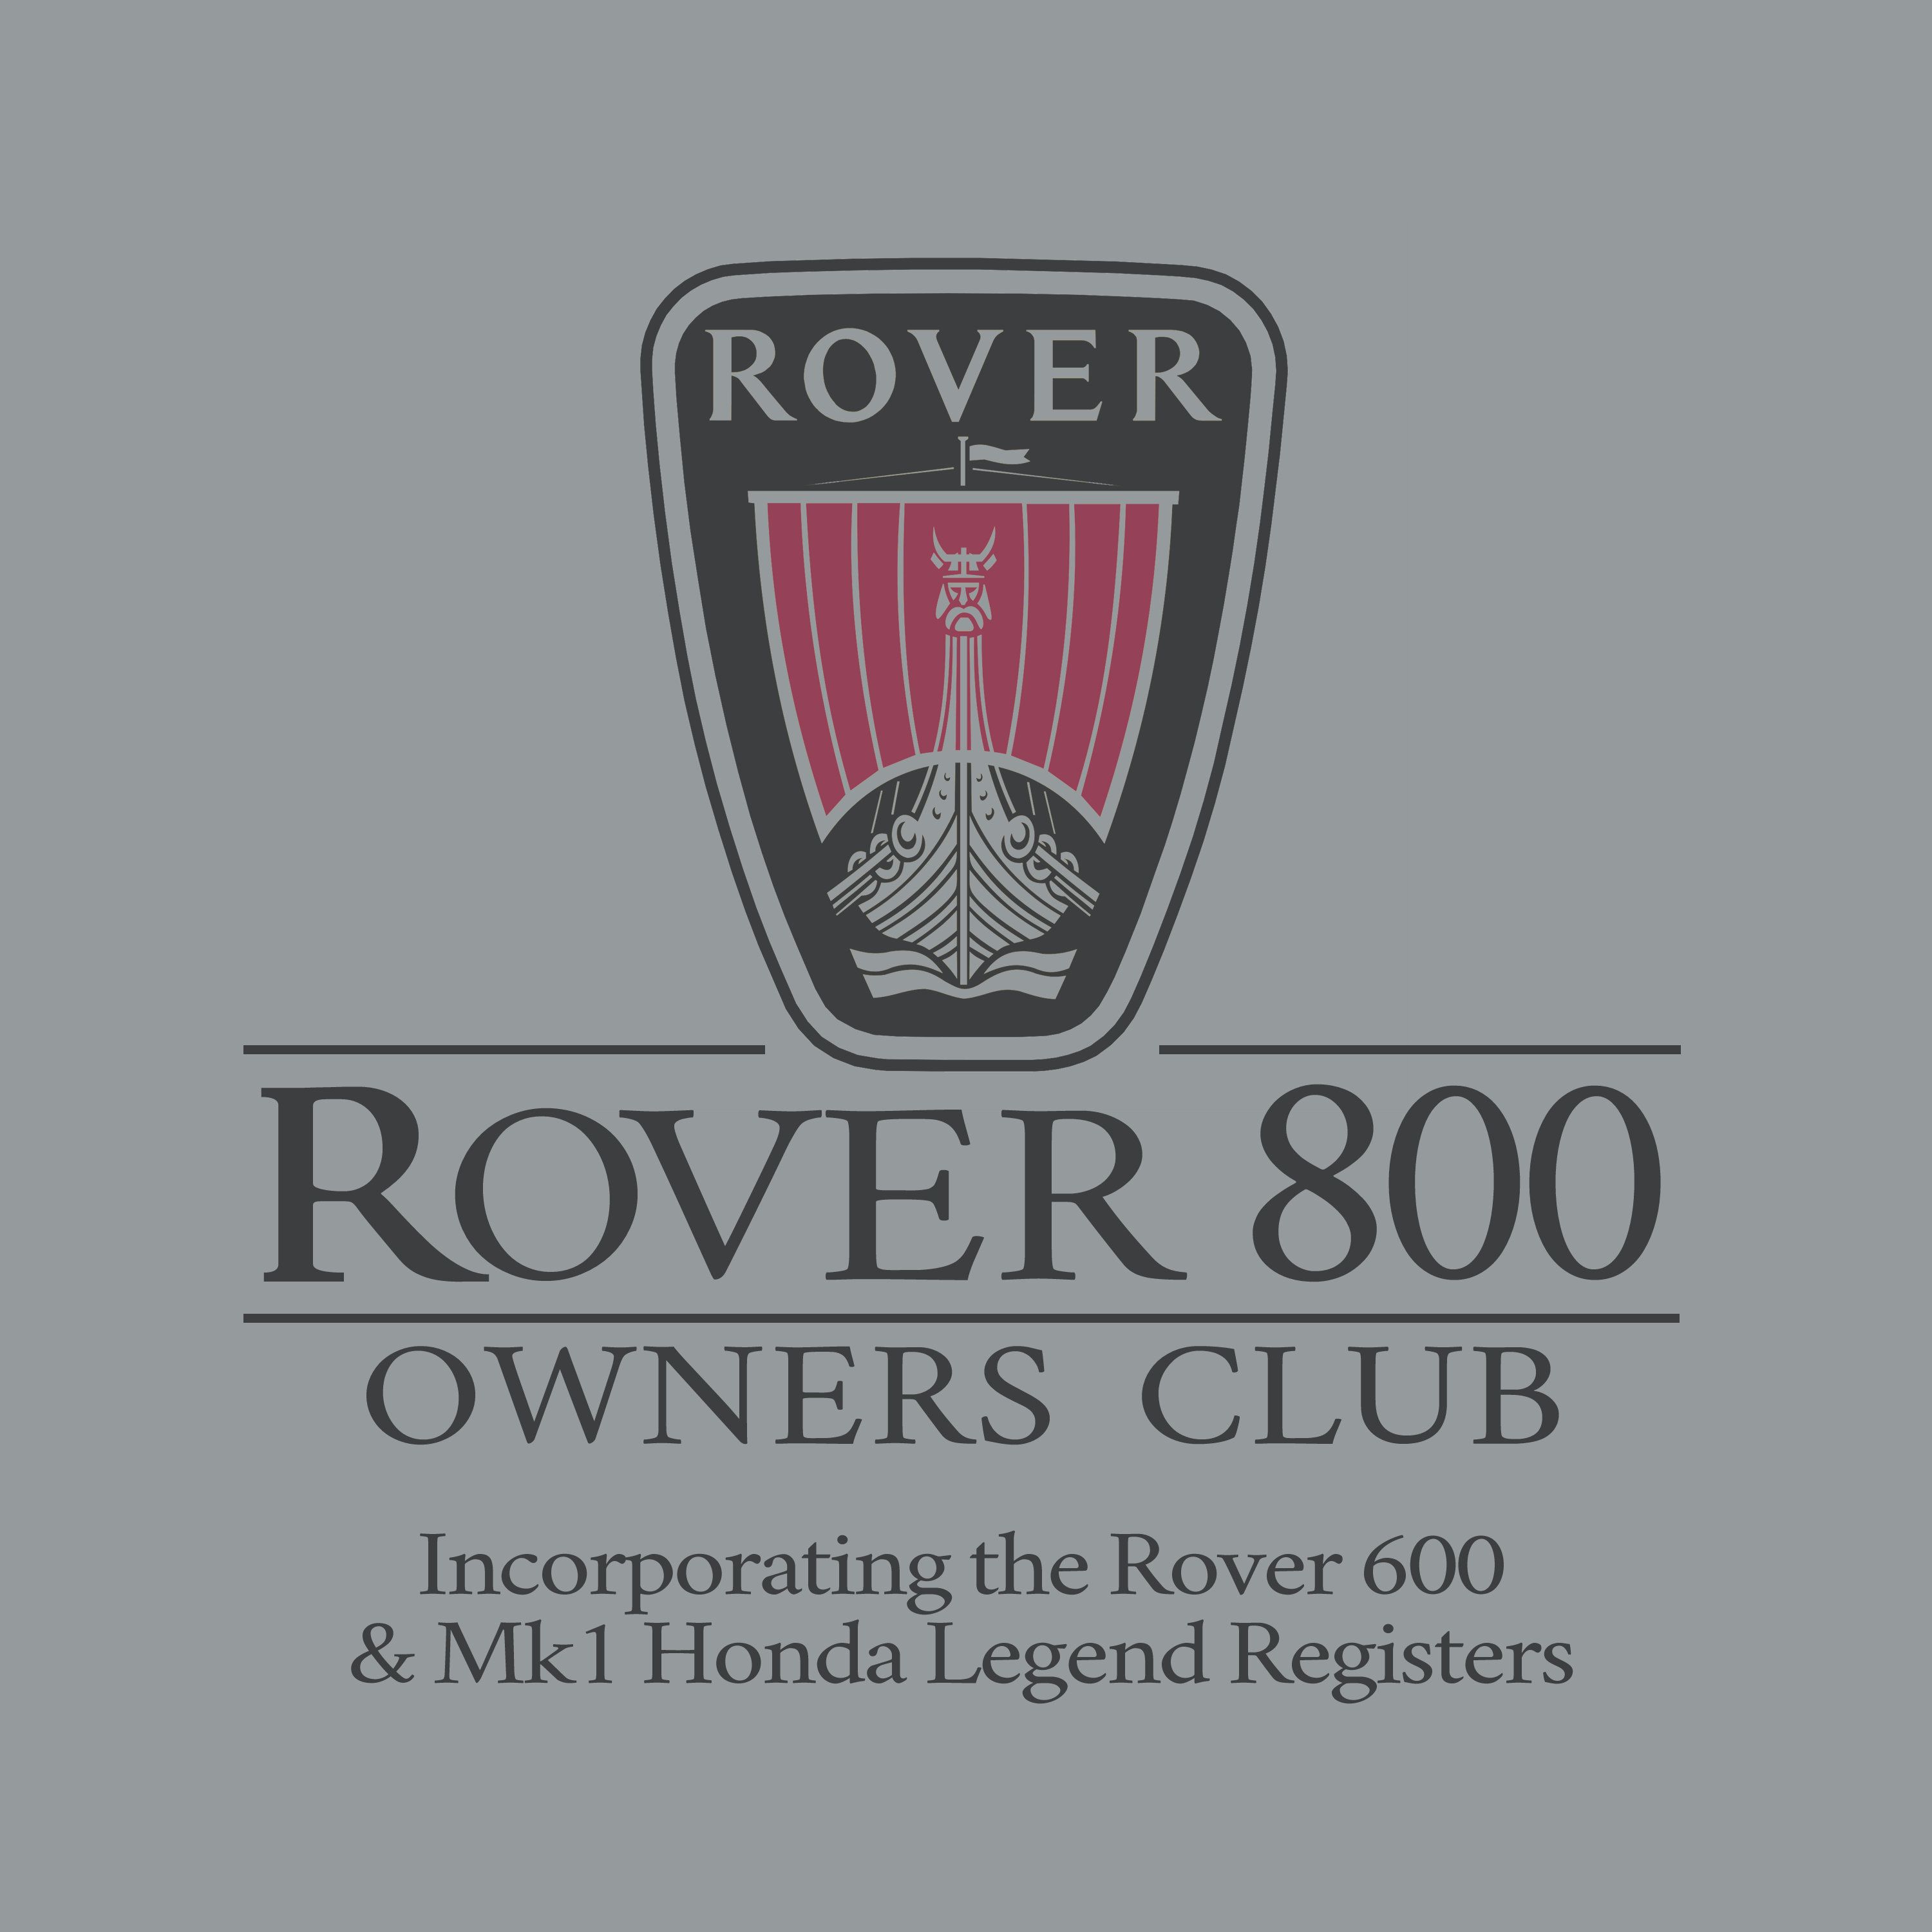 Rover 800 Owners Club incorporating the Rover 600